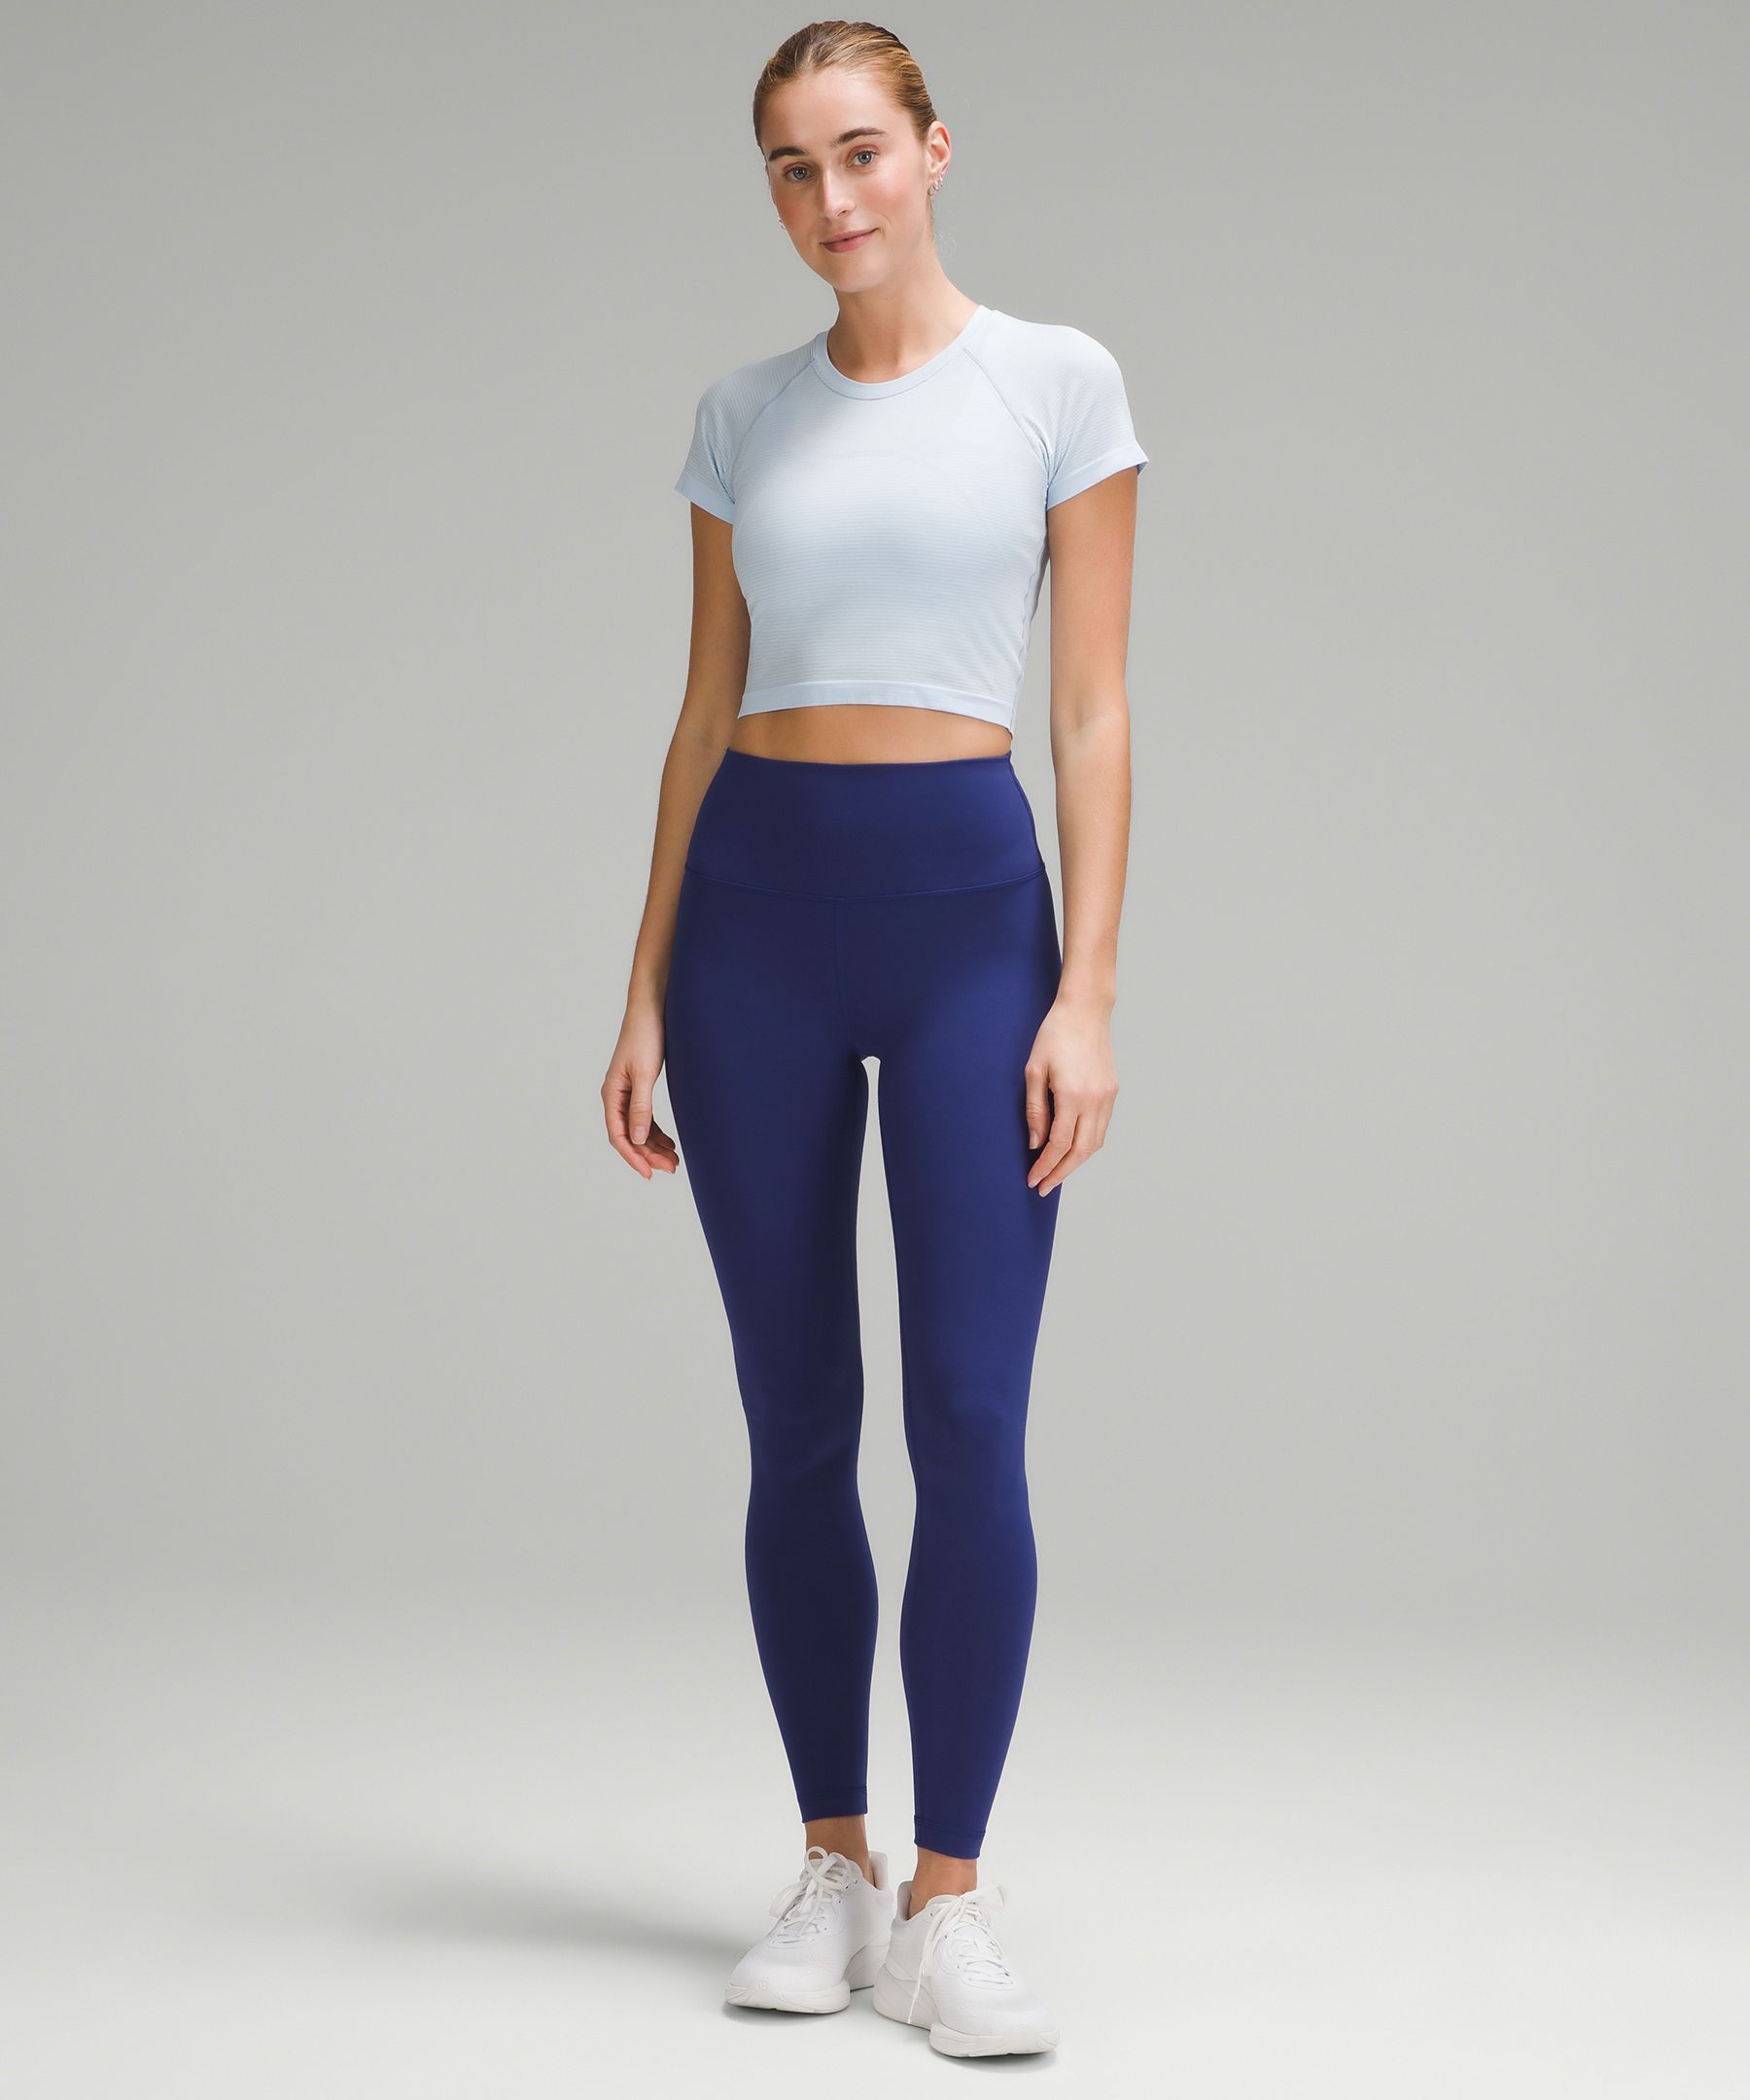 Lululemon high rise wunder under 28” leggings in blue nile Size 8 - $60  (49% Off Retail) - From kendall